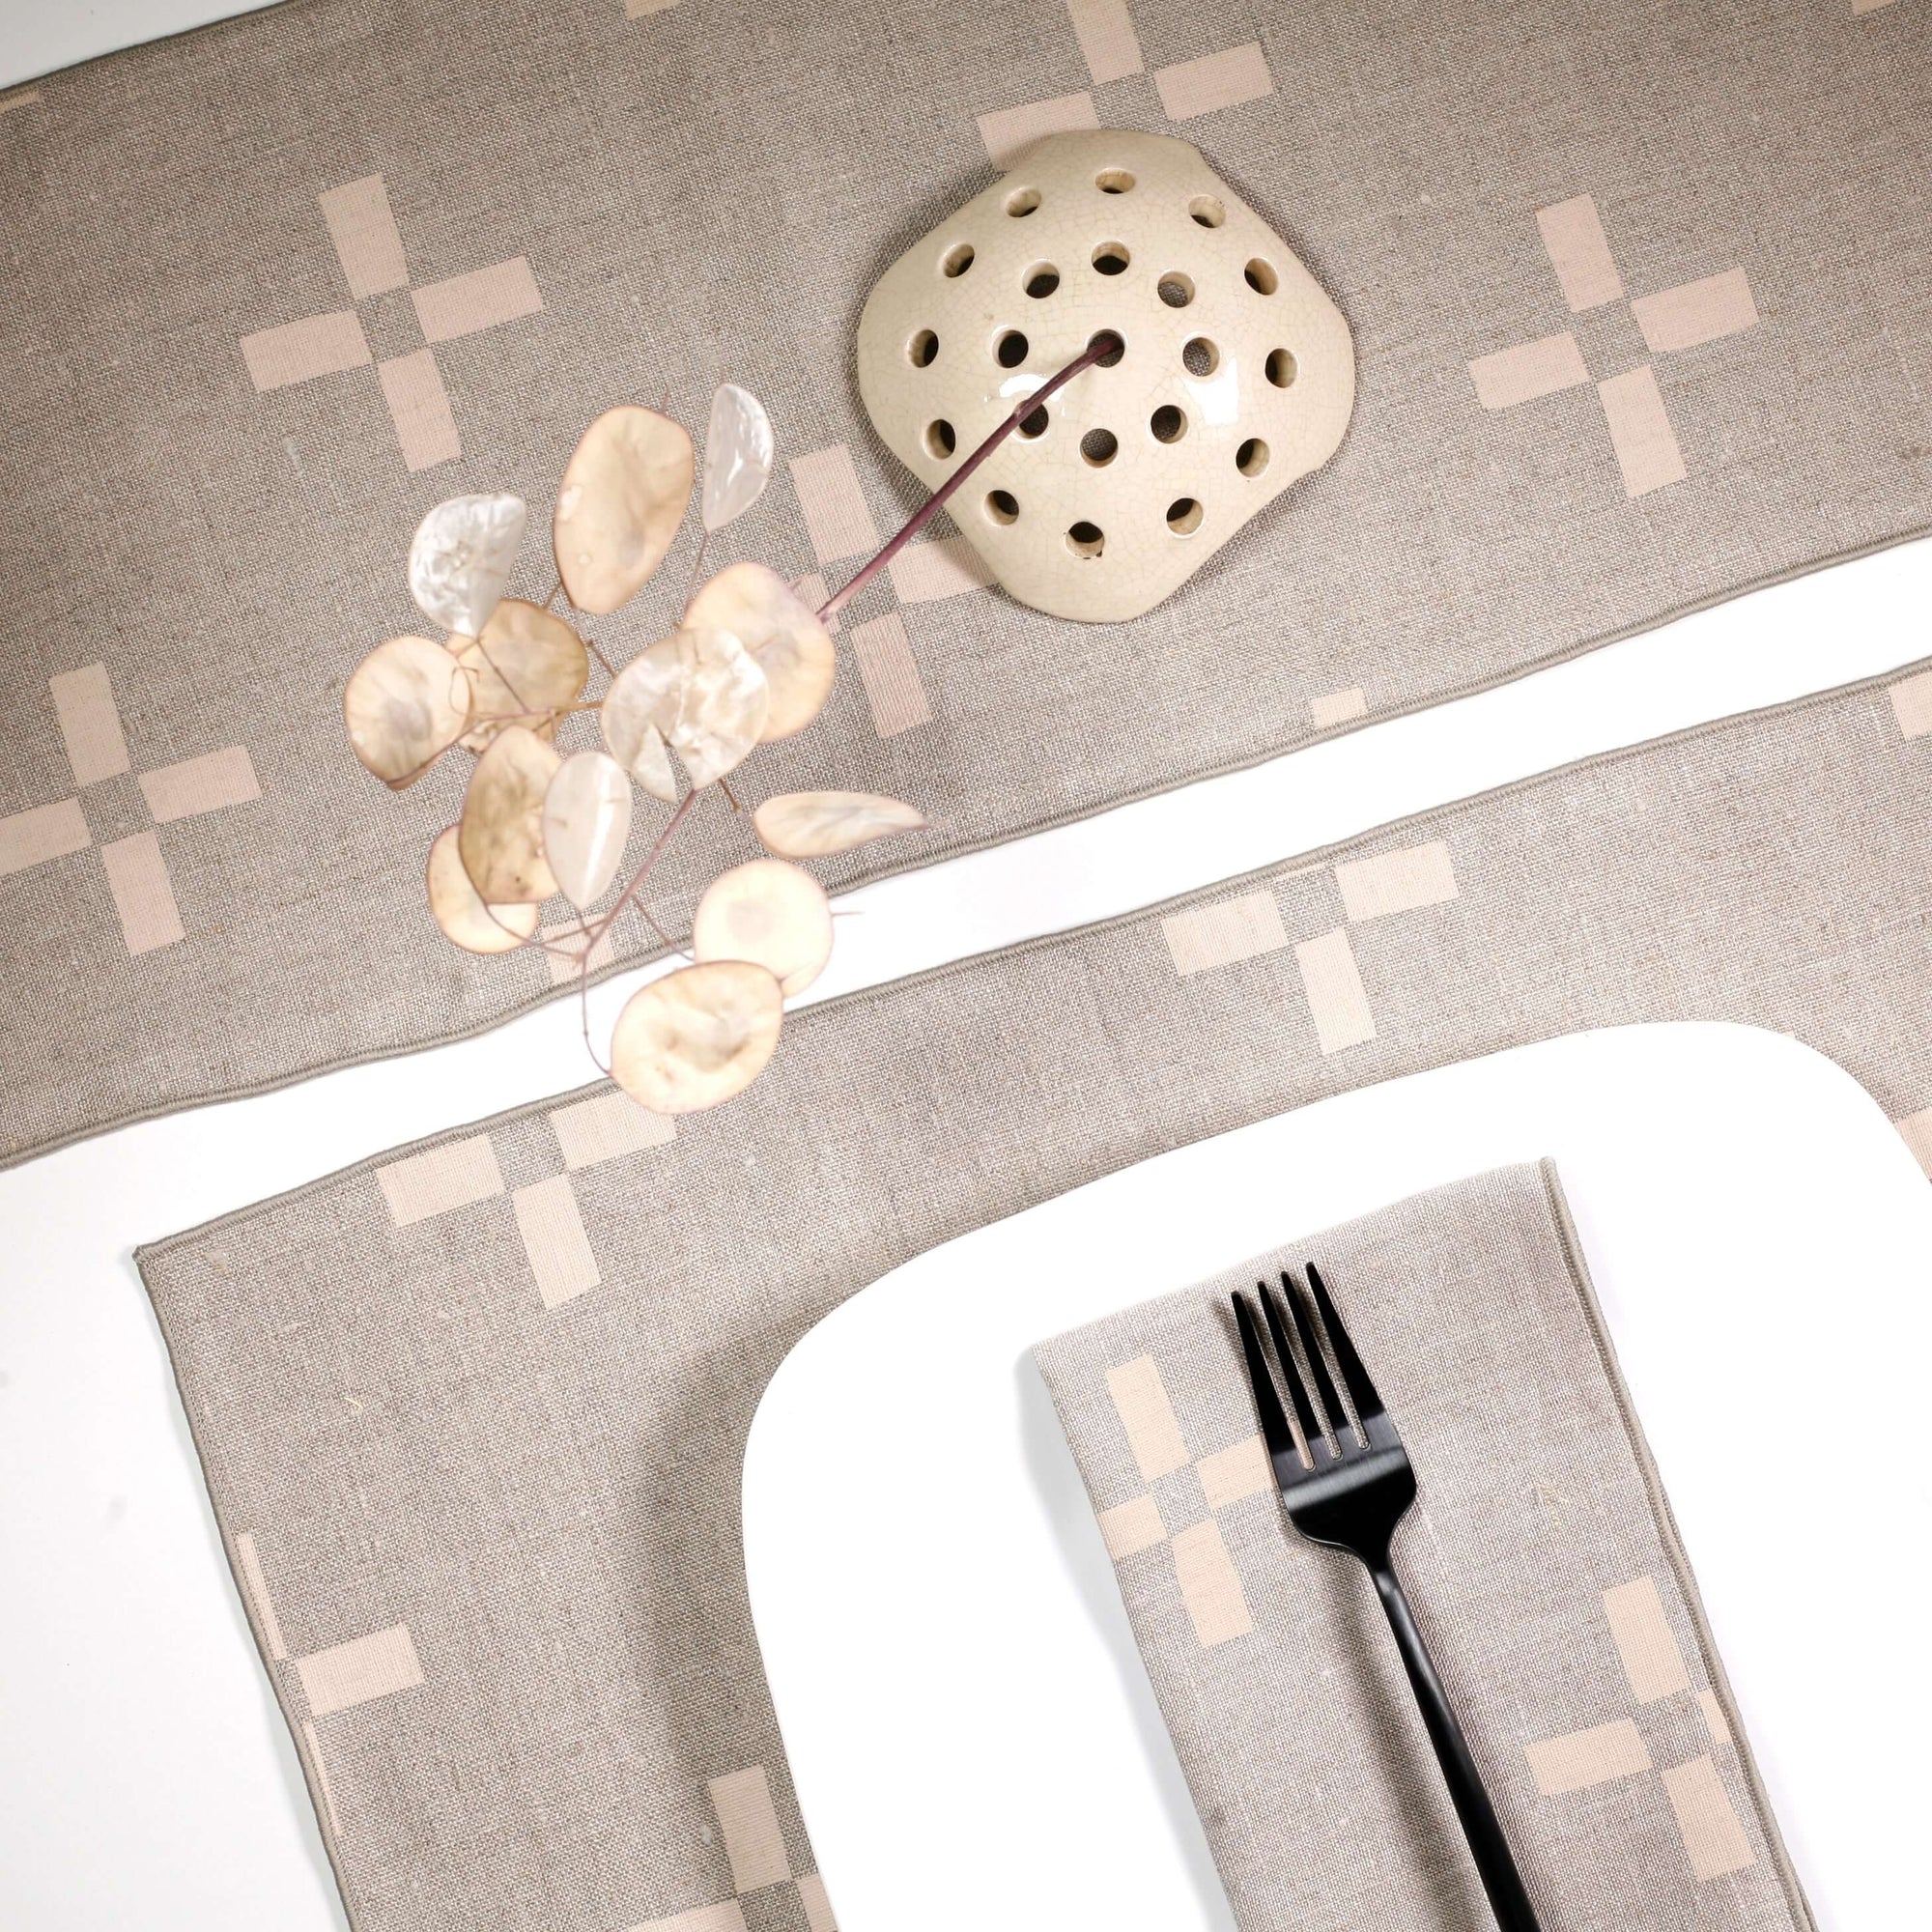 'Plus 2' Hand-Printed Table Runner in Cream on Natural linen